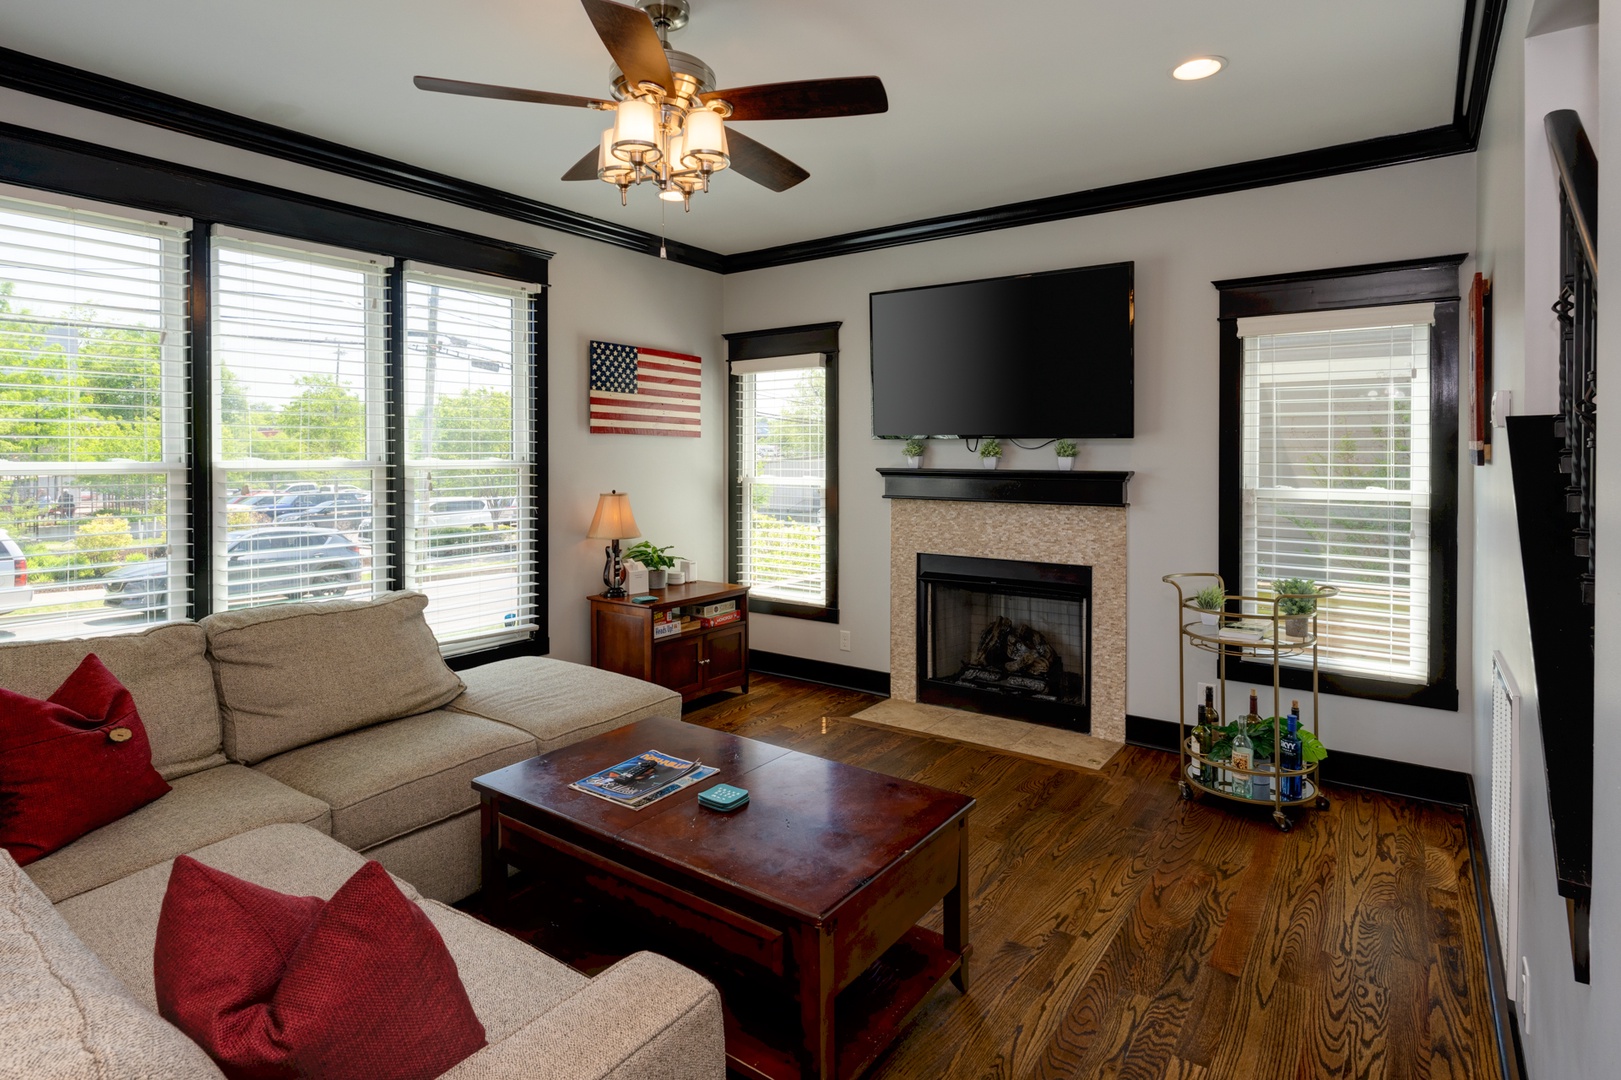 The Living Room boasts comfortable seating, a Smart TV, and a warming Gas Fireplace